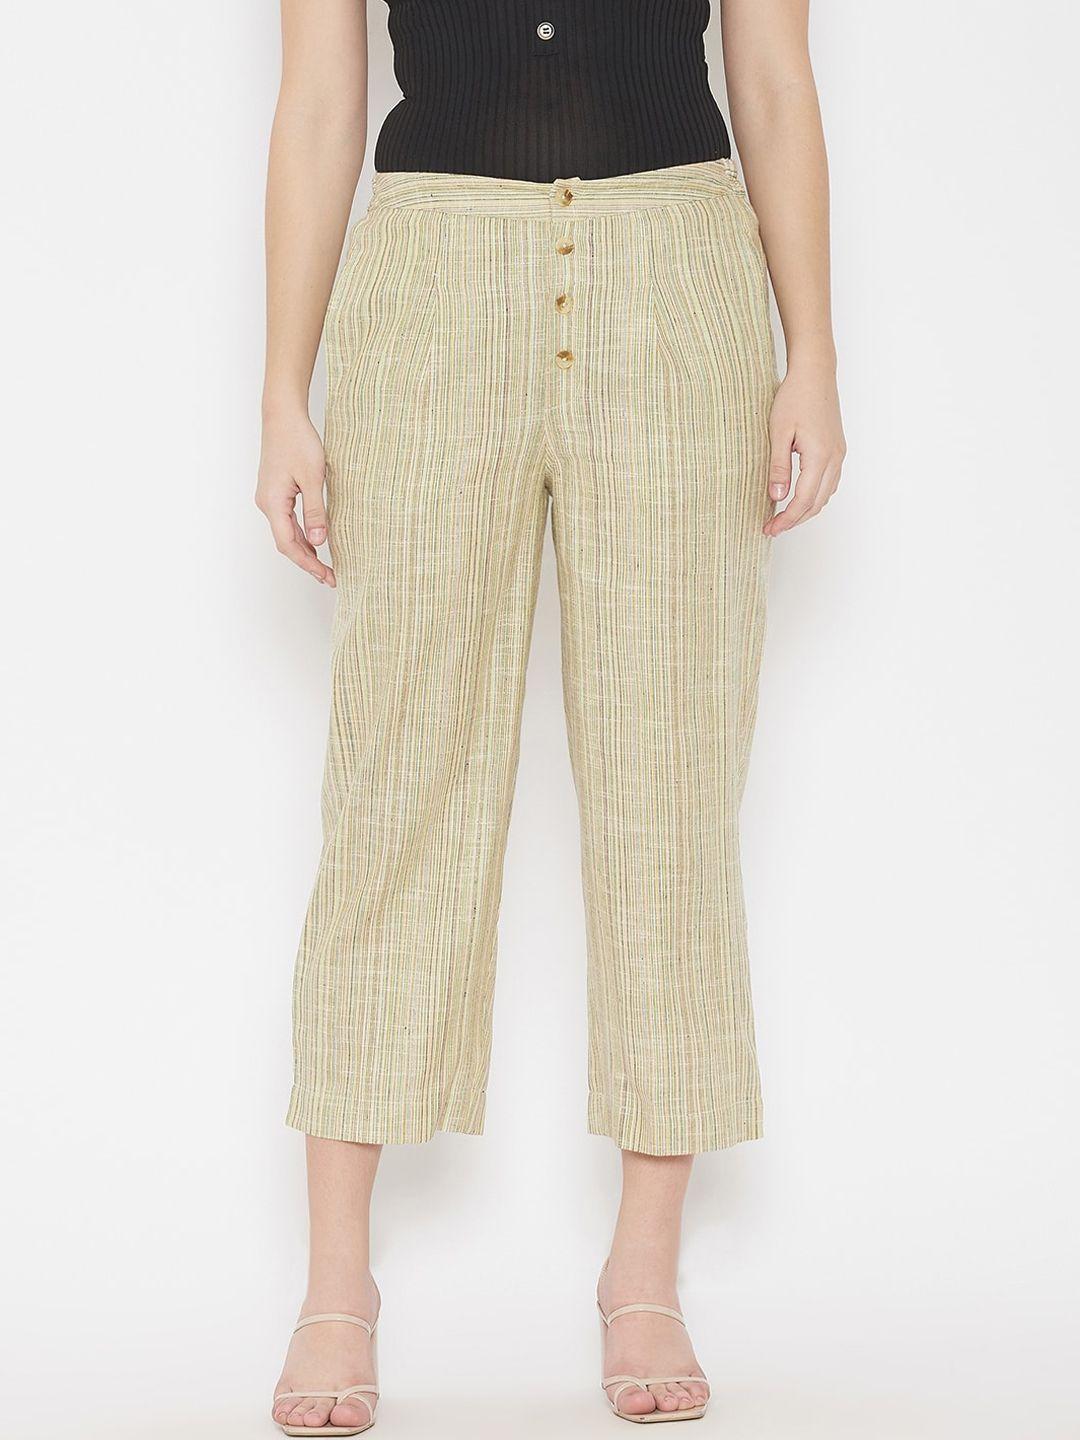 winered-women-green-striped-trousers